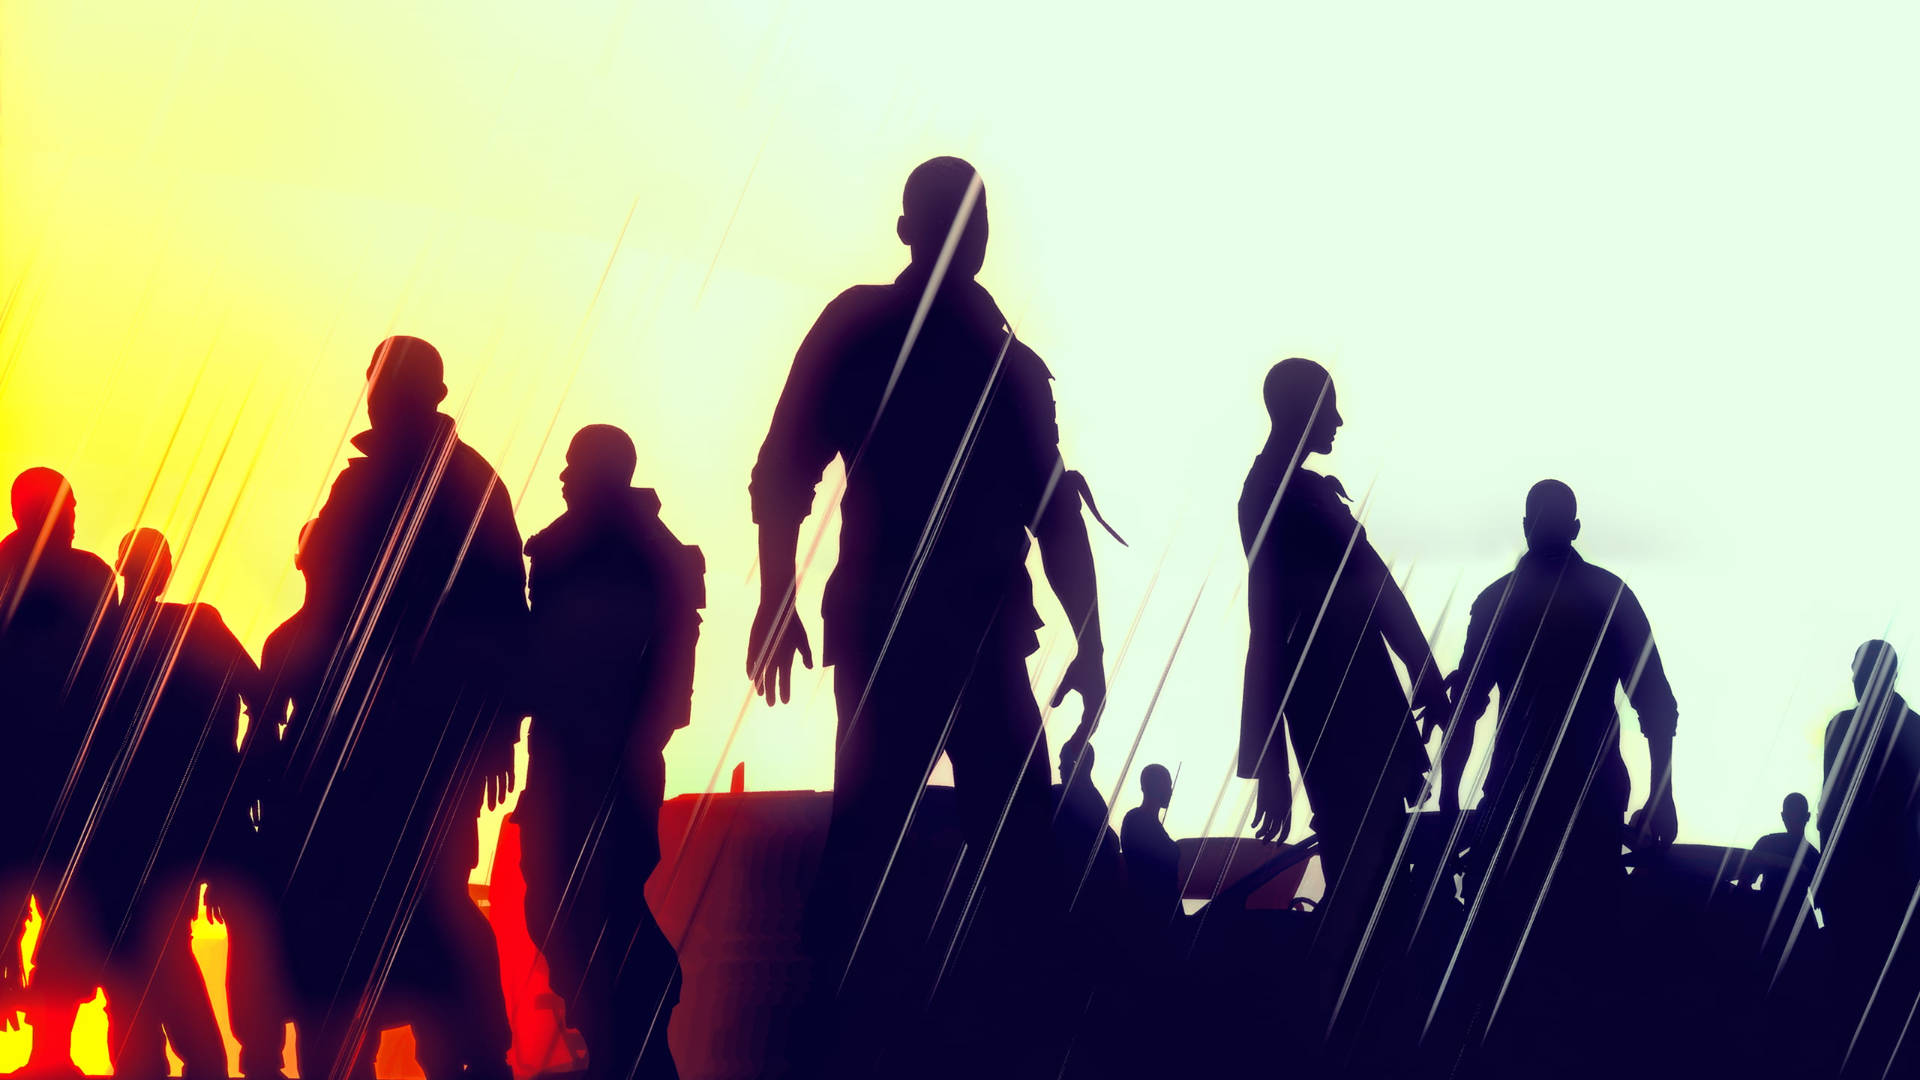 Dying Light Zombie Silhouettes Wallpaper